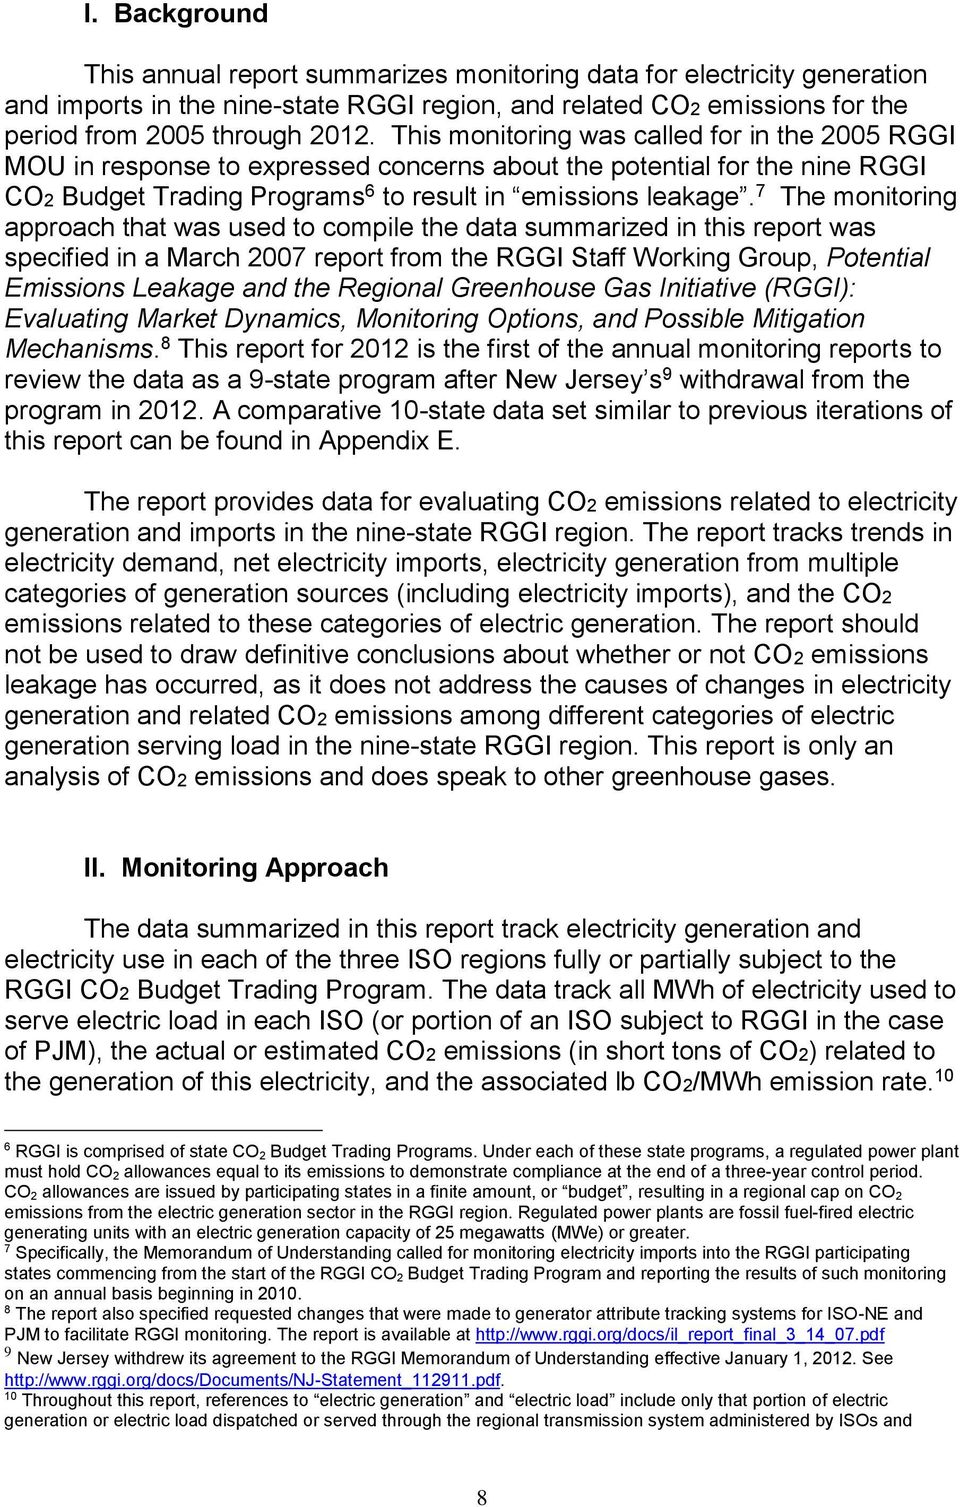 7 The monitoring approach that was used to compile the data summarized in this report was specified in a March 2007 report from the RGGI Staff Working Group, Potential Leakage and the Regional